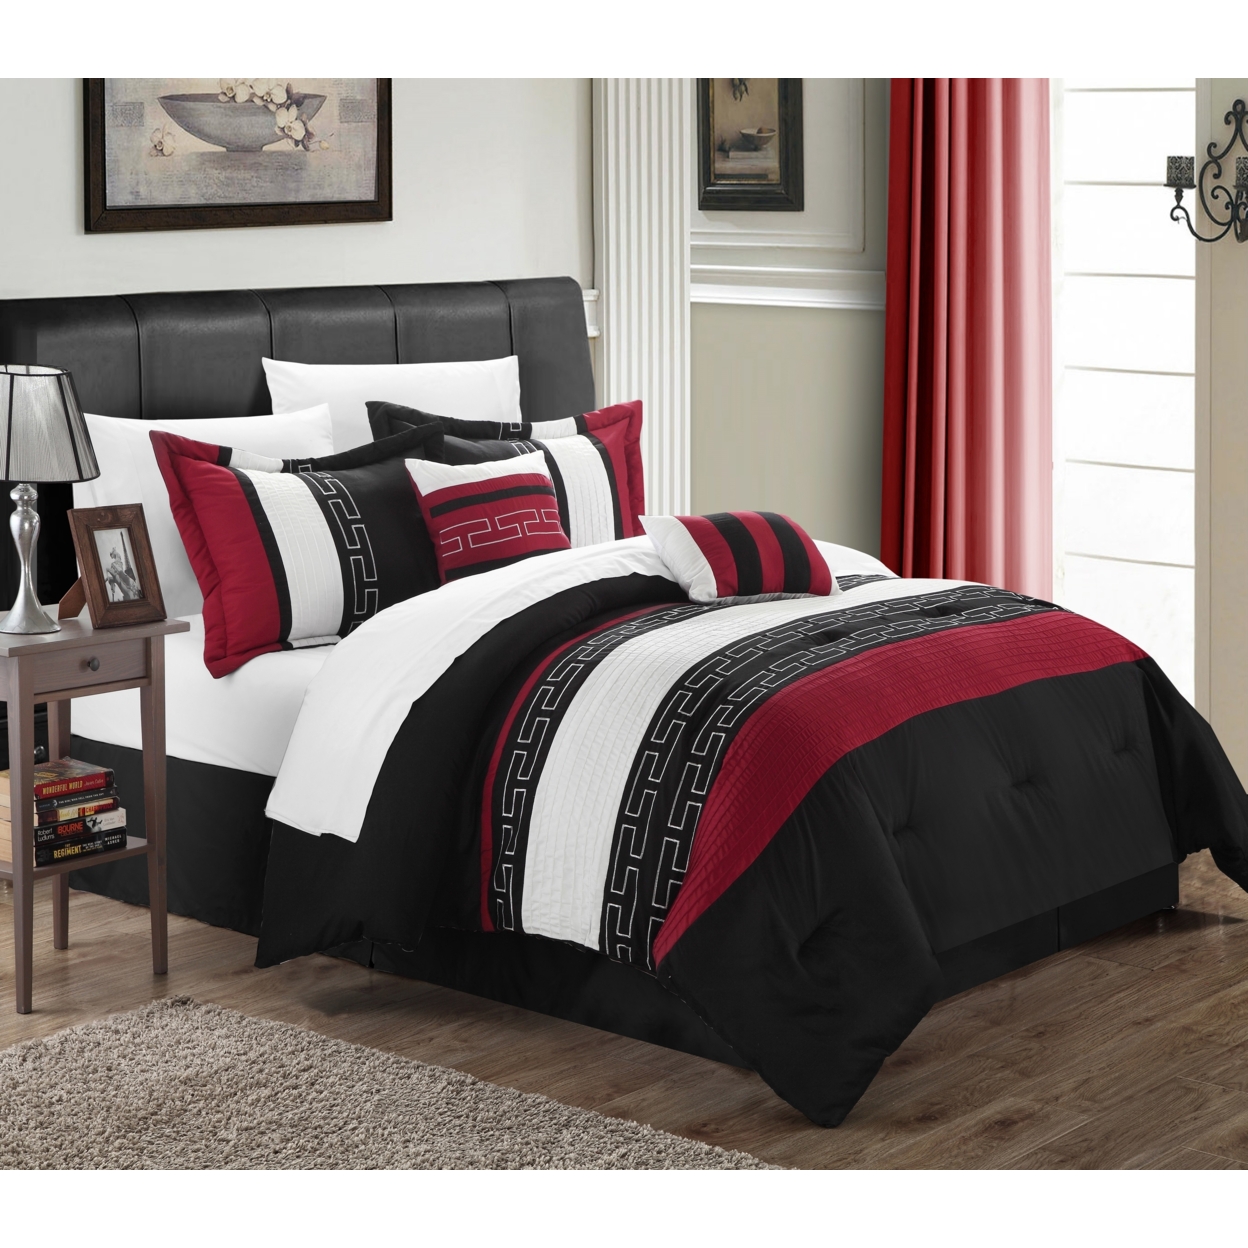 Chic Home Coralie 6-piece Comforter Set Hotel Collection - Burgundy, Queen